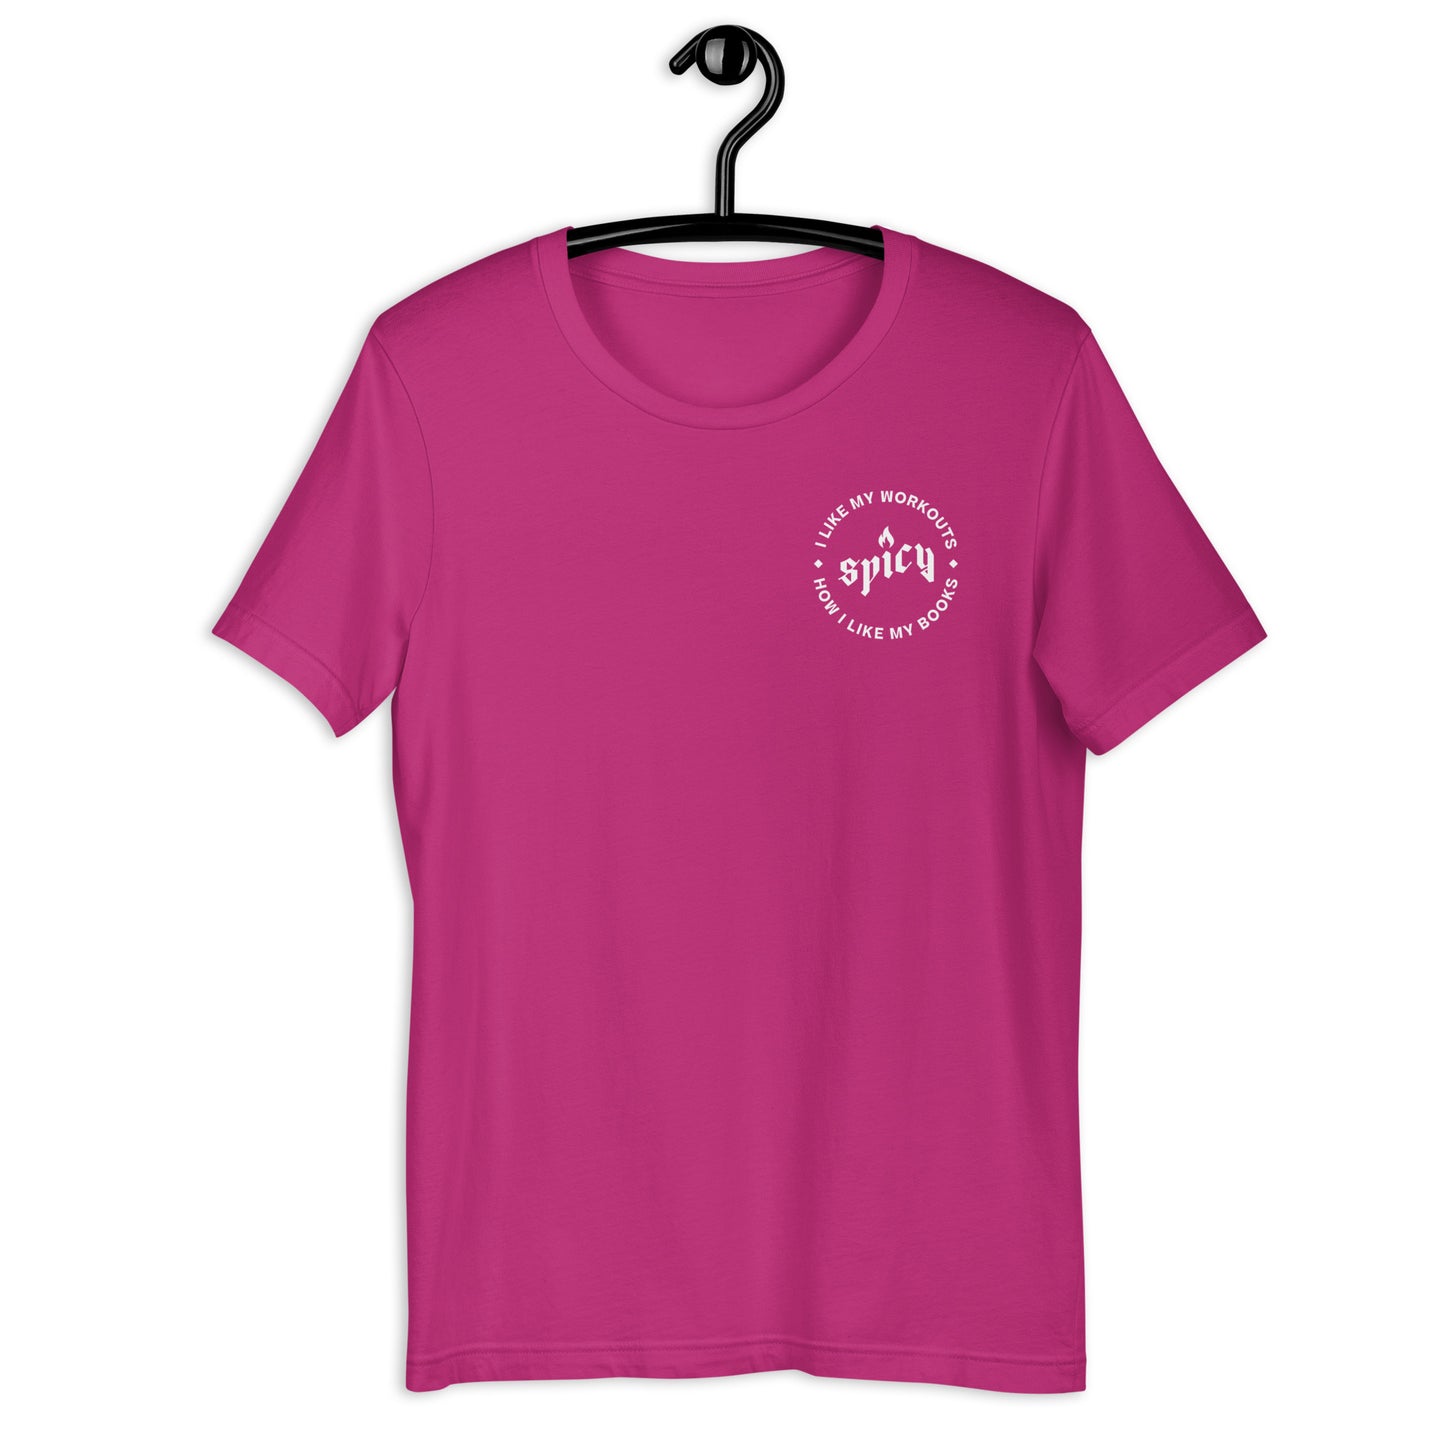 I Like It Spicy Unisex Shirt in Berry